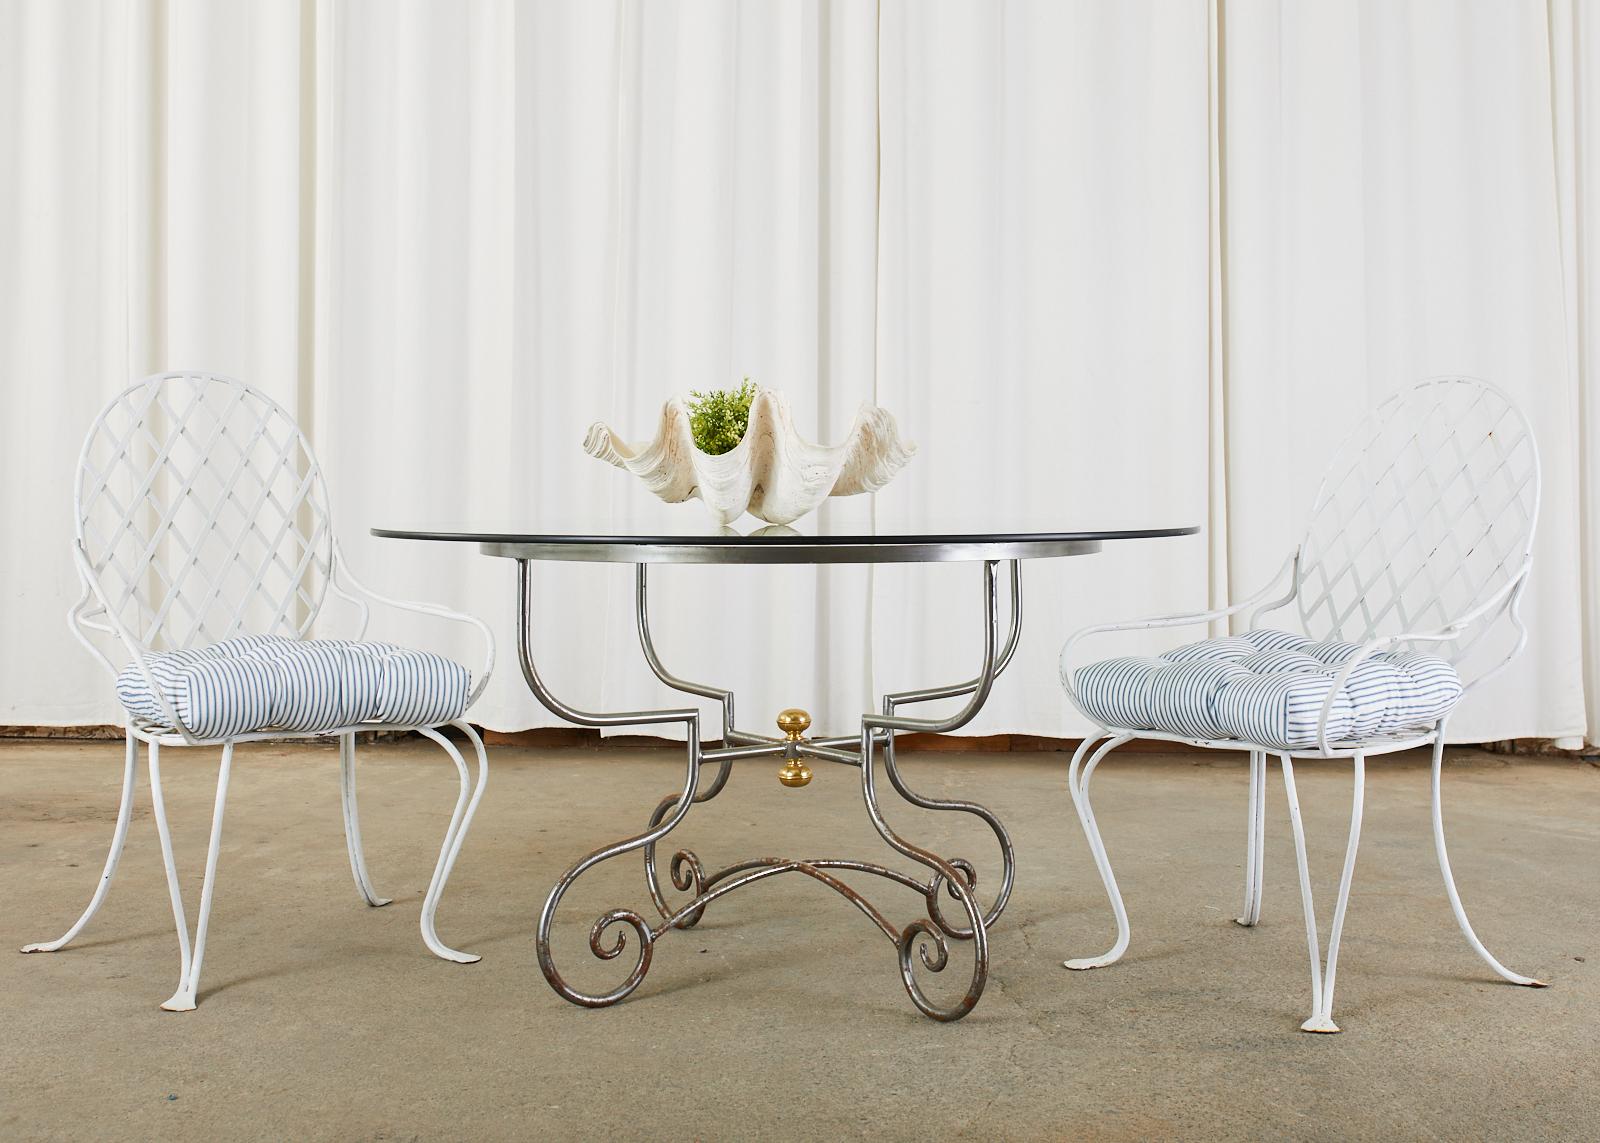 Distinctive French iron and brass dining table suitable for patio or garden. The round table features a pastry table style iron base crafted from four gracefully curved legs ending with scrolled feet. The tops of the legs are conjoined by a round